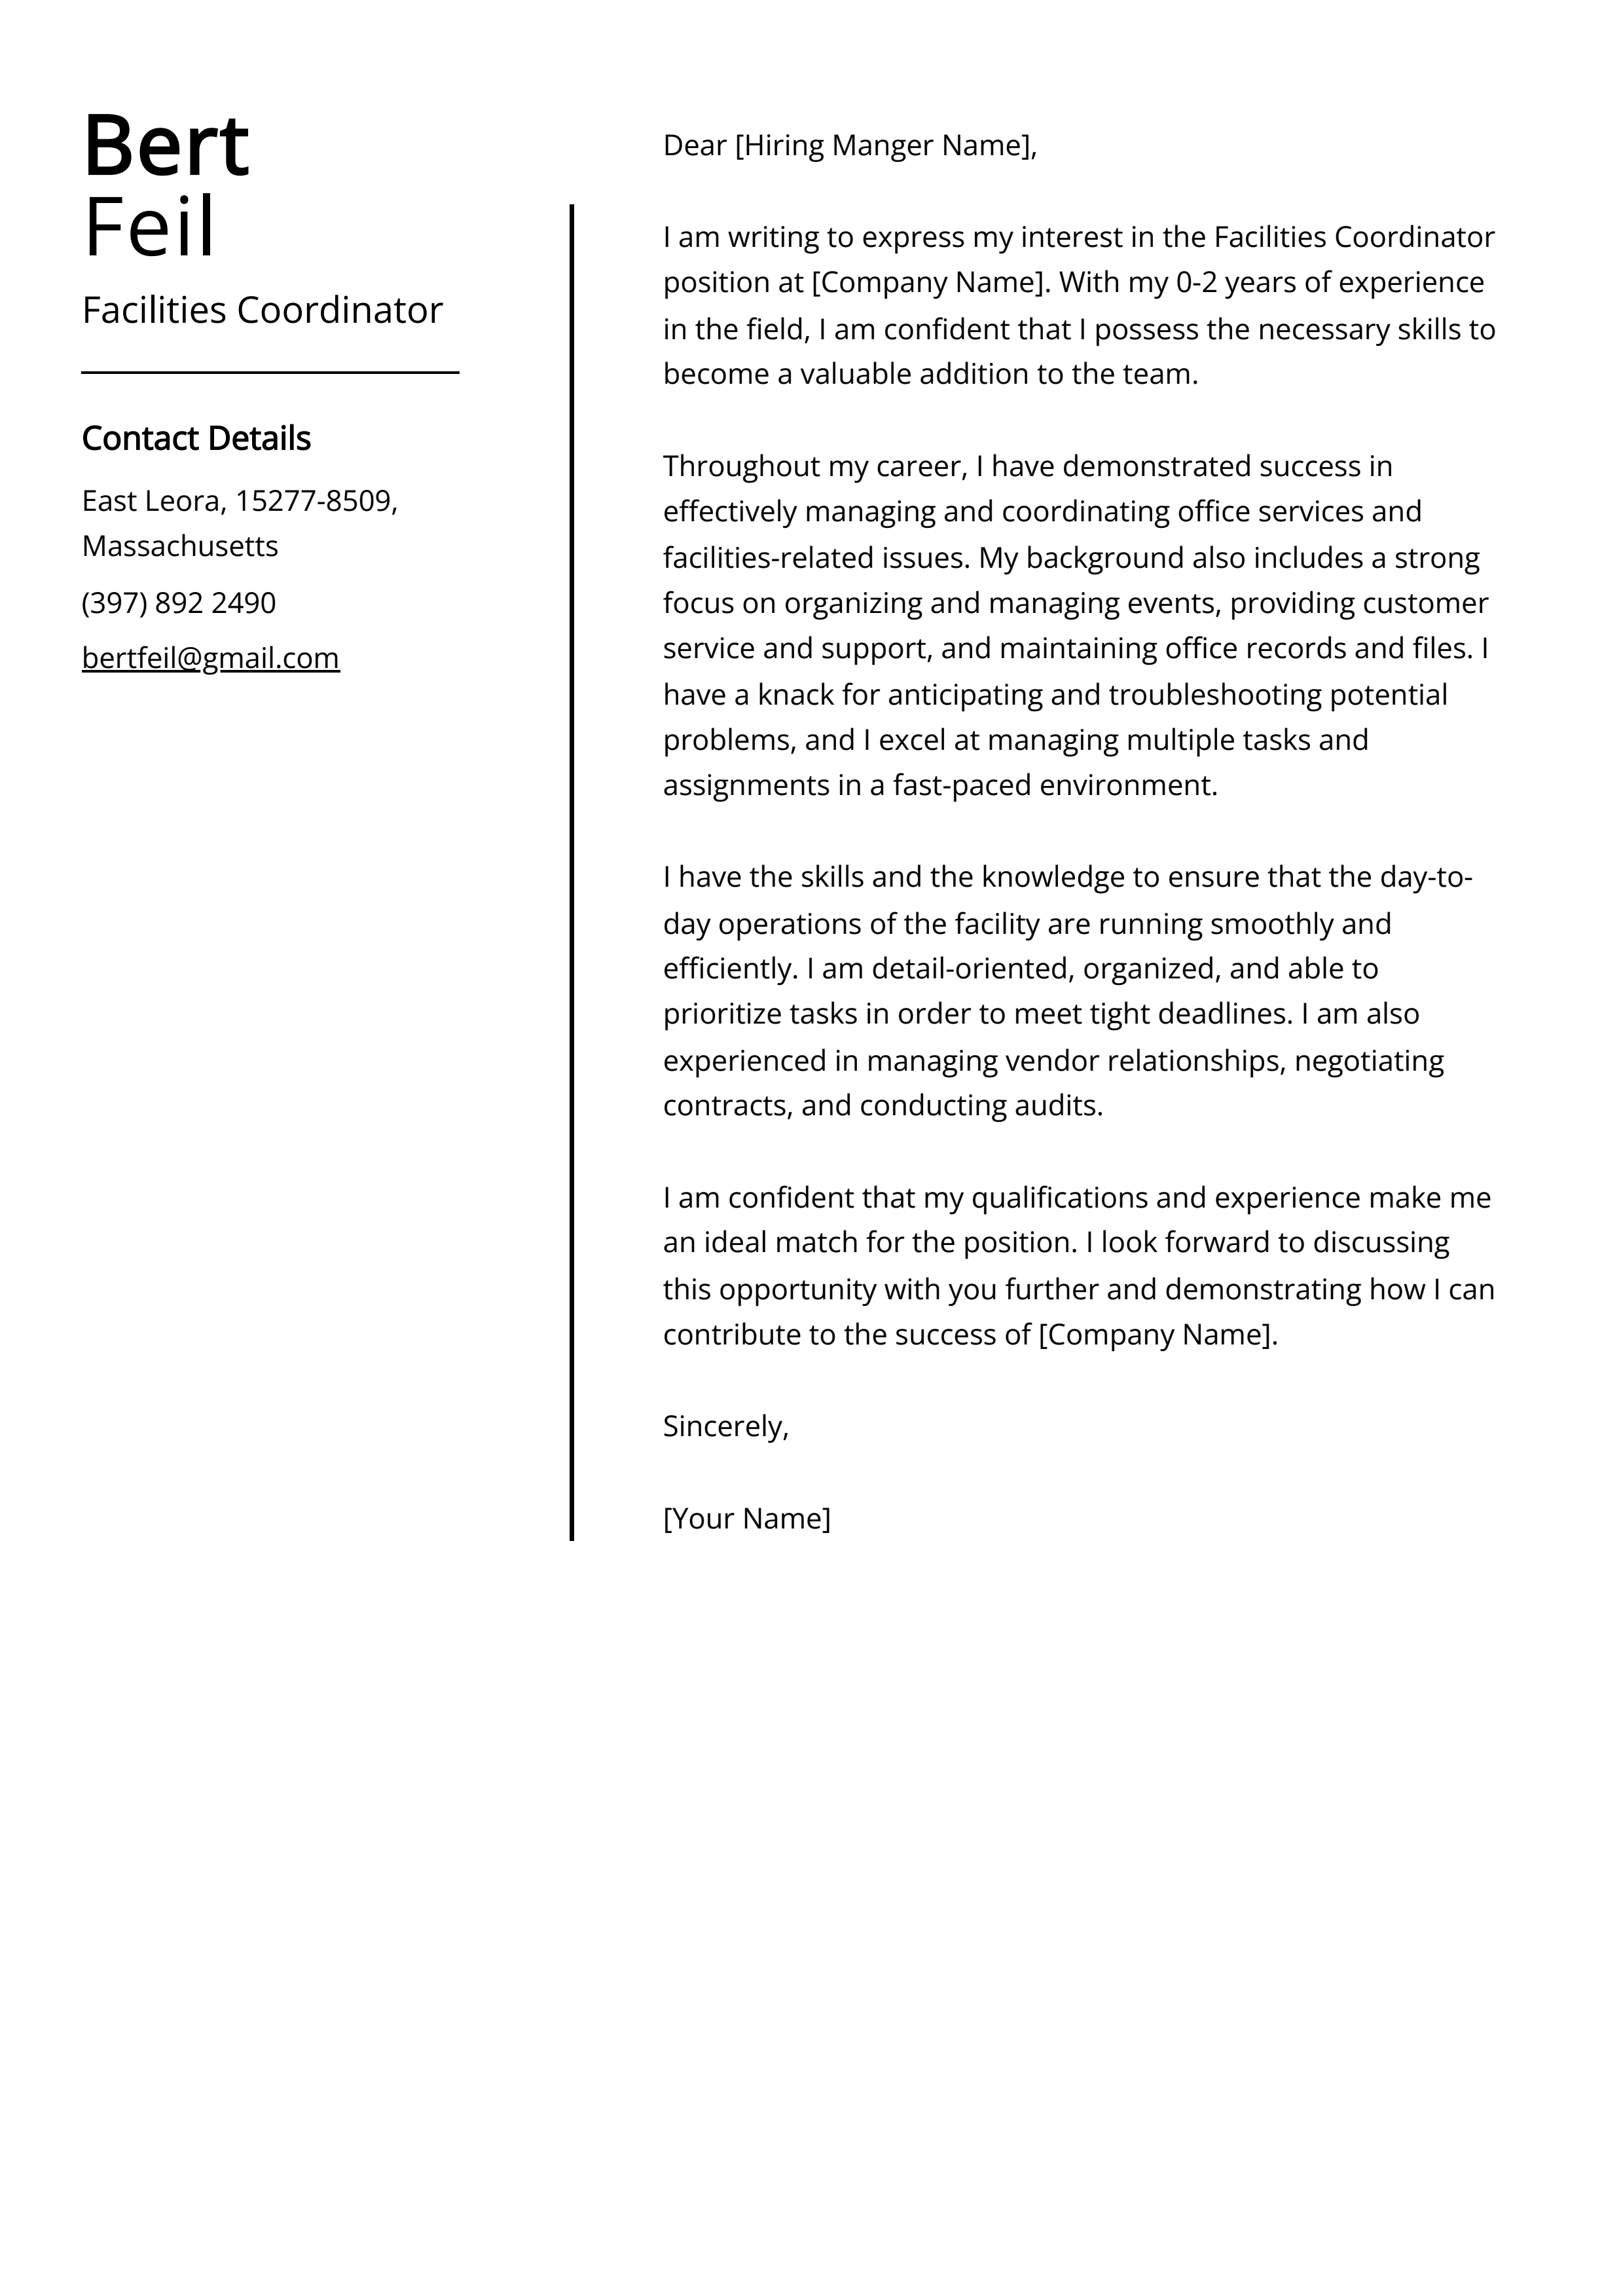 Facilities Coordinator Cover Letter Example